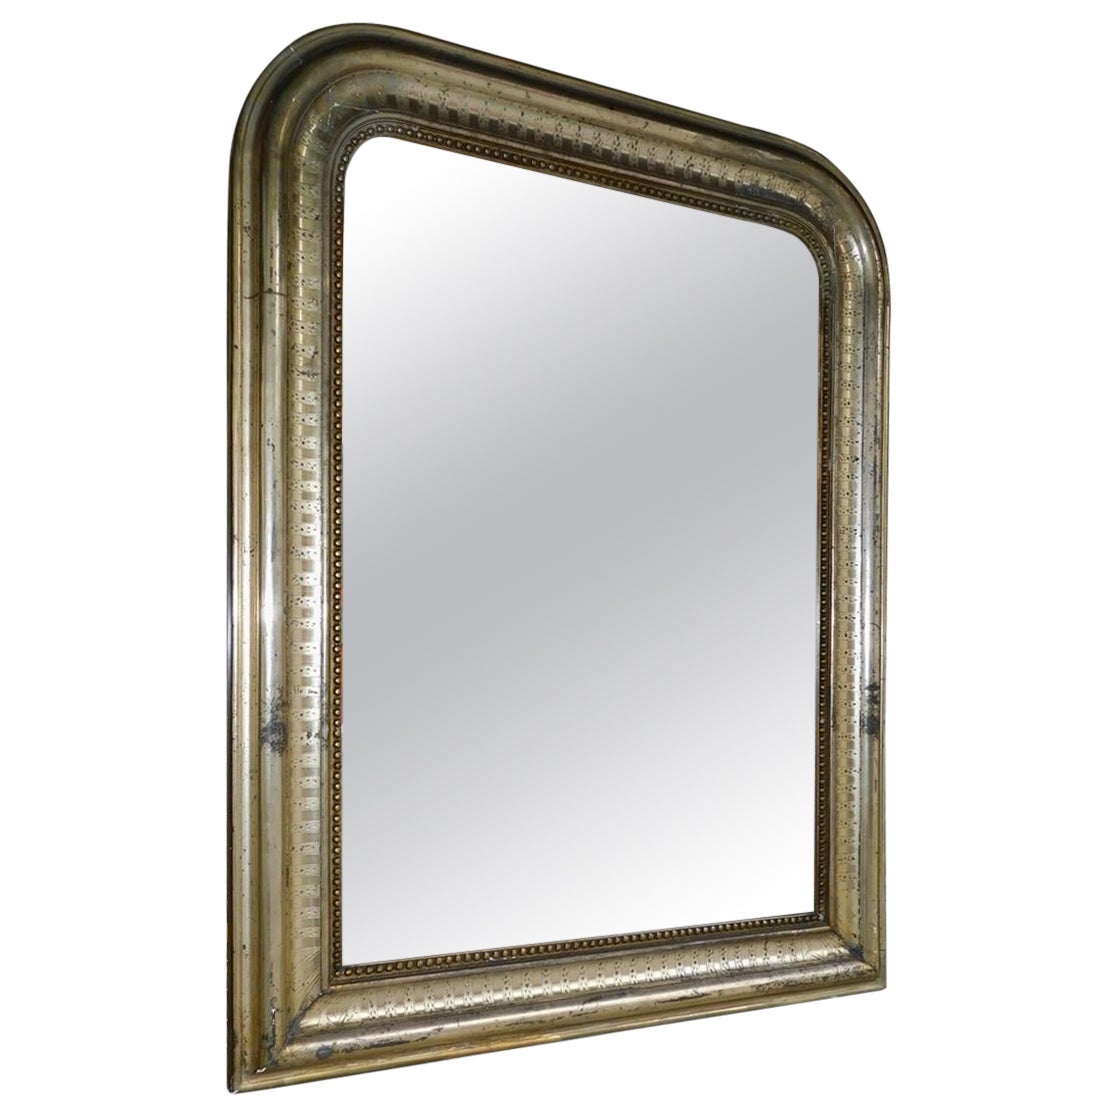 French Louis Philippe Silver Gilt Wall Mirror with Orig. Wood Backing, C. 1830